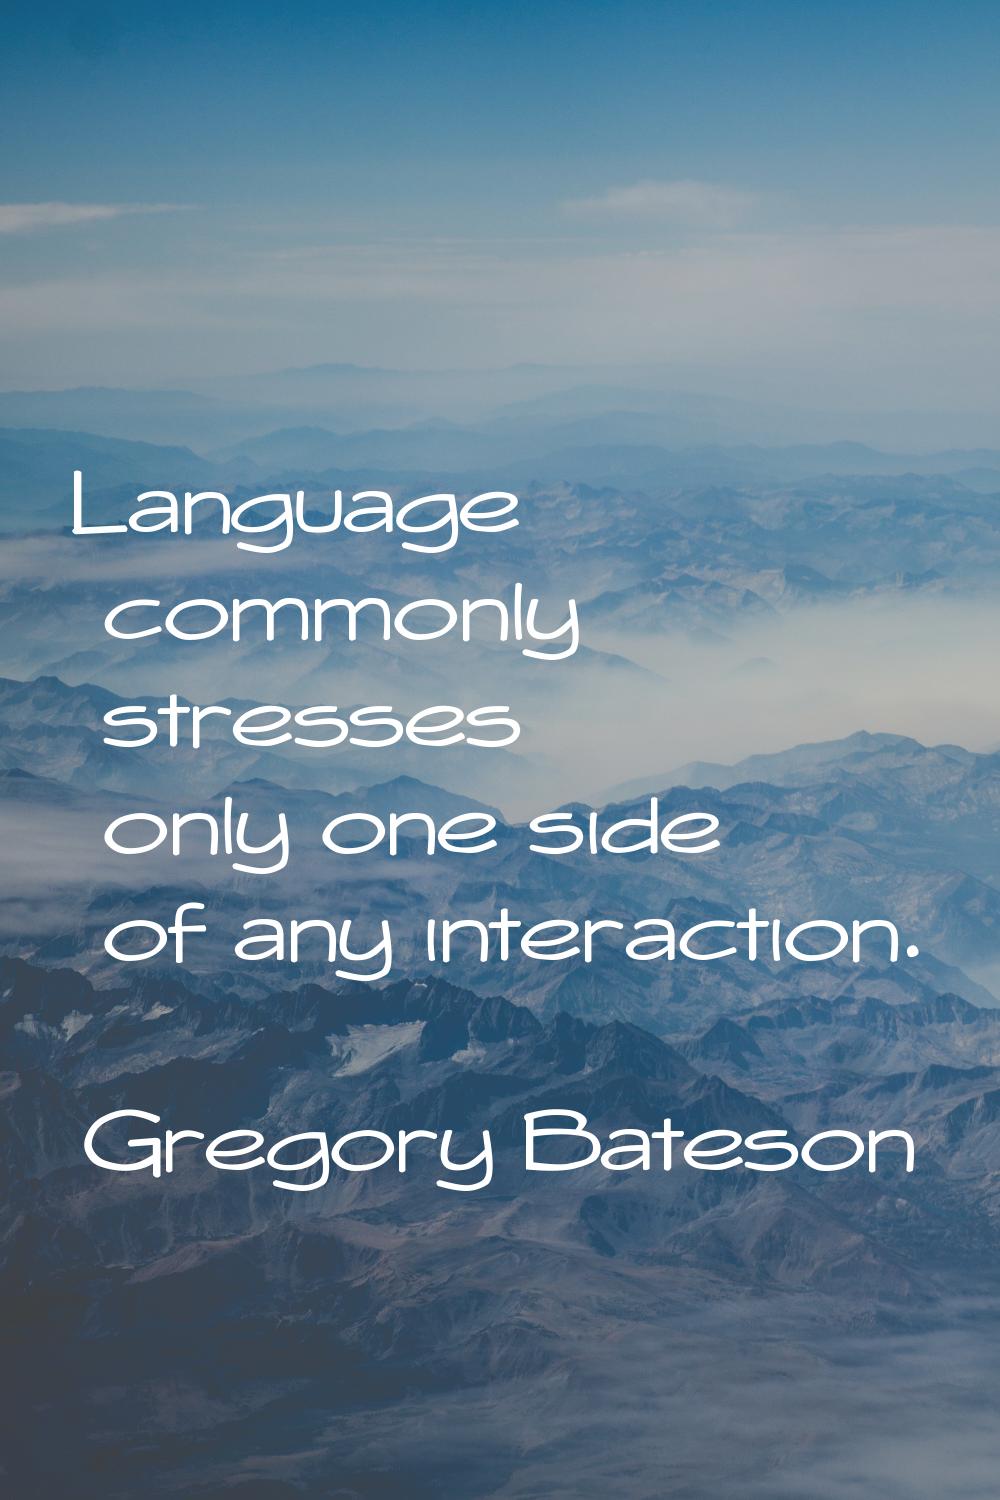 Language commonly stresses only one side of any interaction.